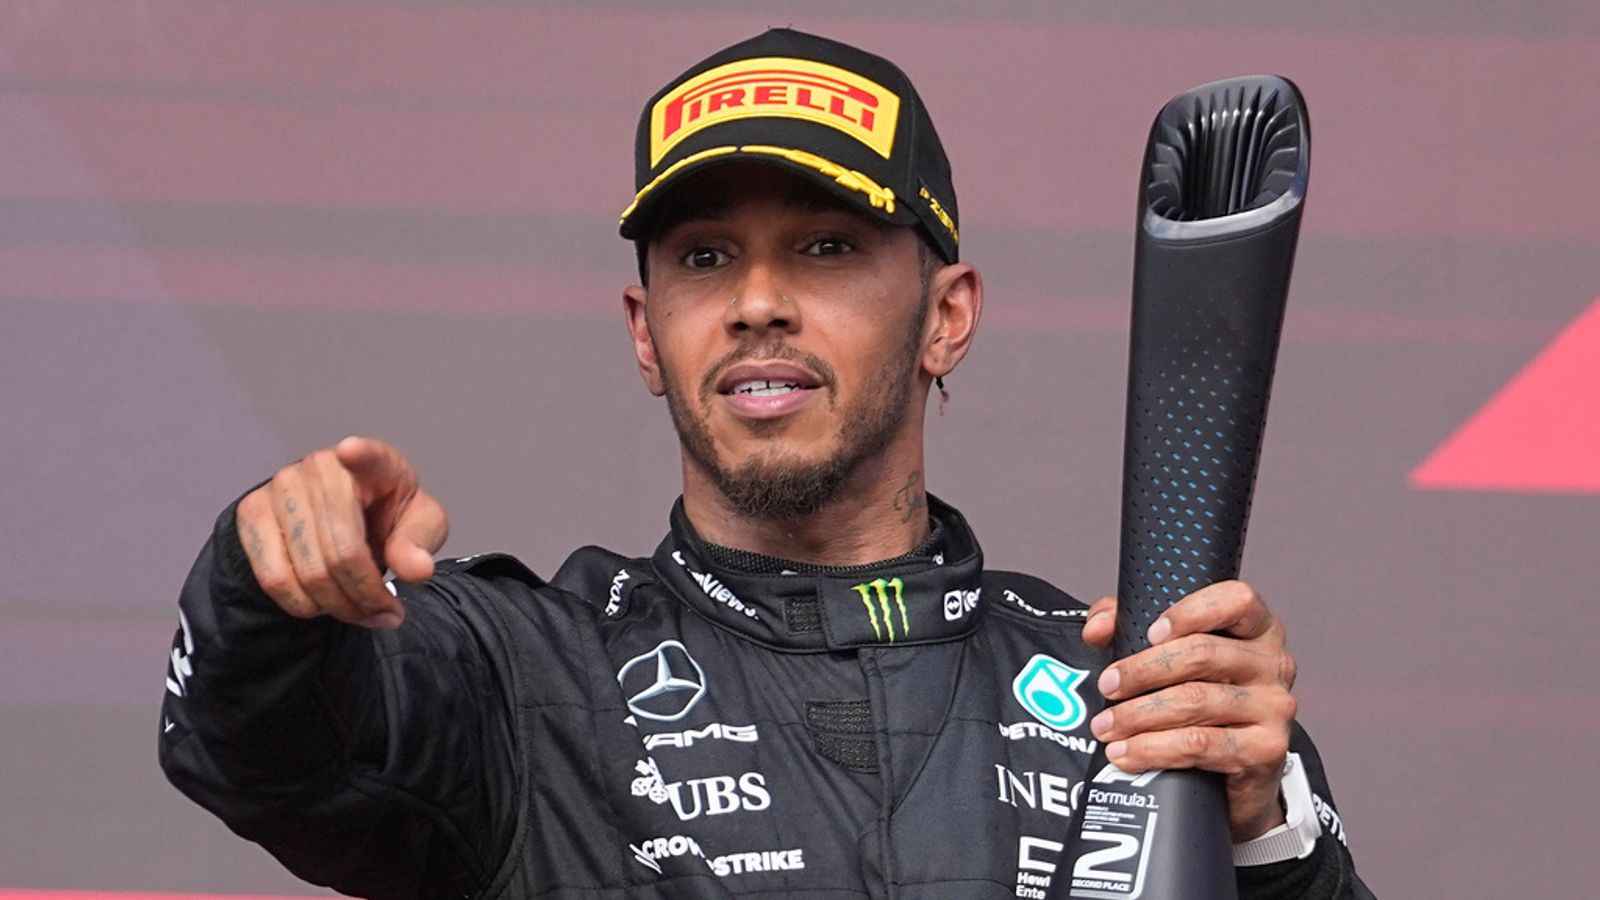 Lewis Hamilton to move to Ferrari: F1 driver has the chance to do something extraordinary